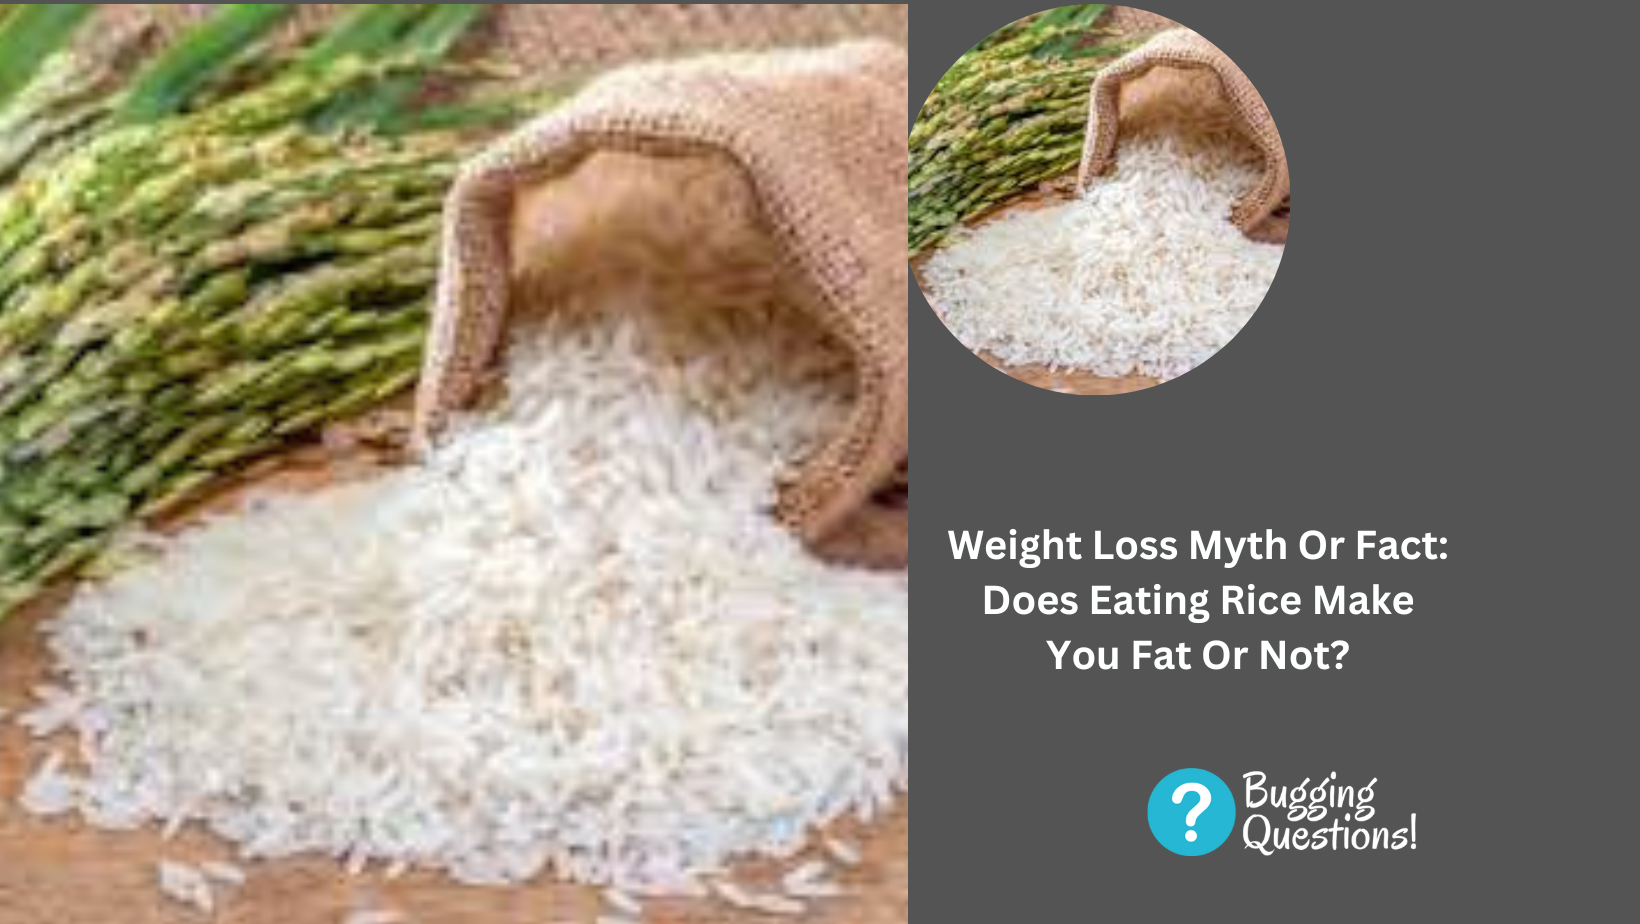 Weight Loss Myth Or Fact: Does Eating Rice Make You Fat Or Not?